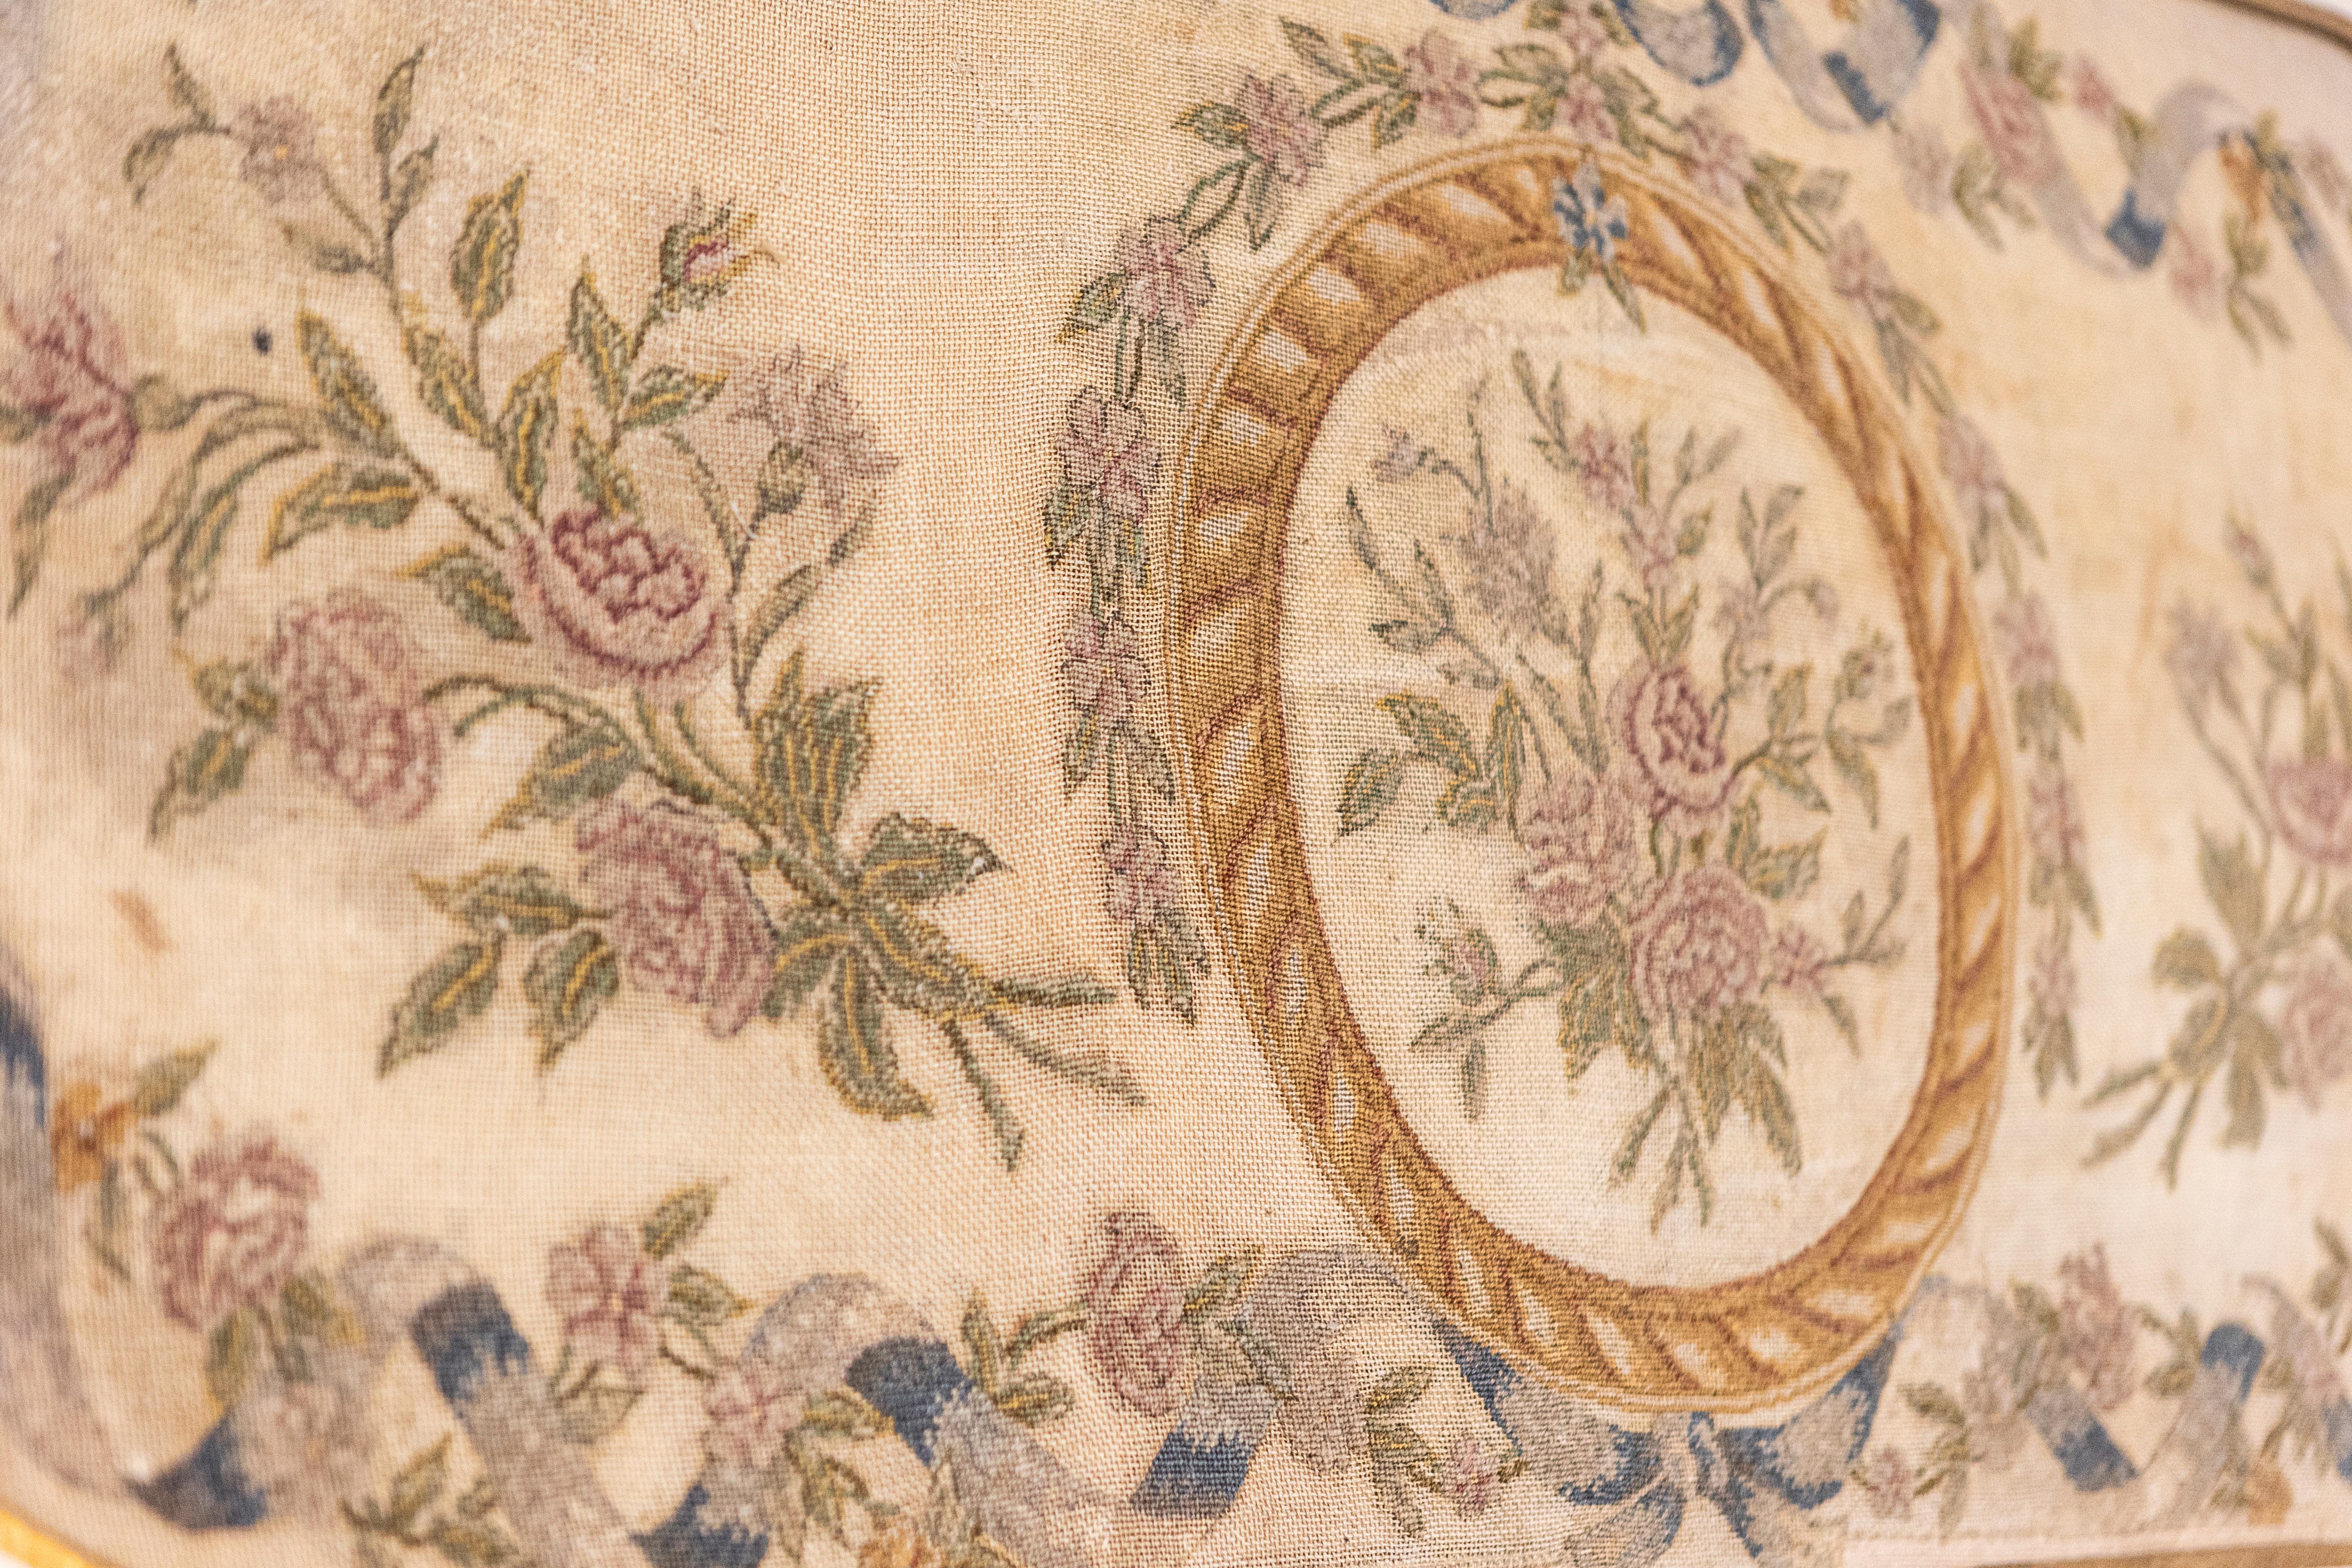 French 19th Century Framed Needlepoint Tapestry with Ribbon and Floral Décor For Sale 1